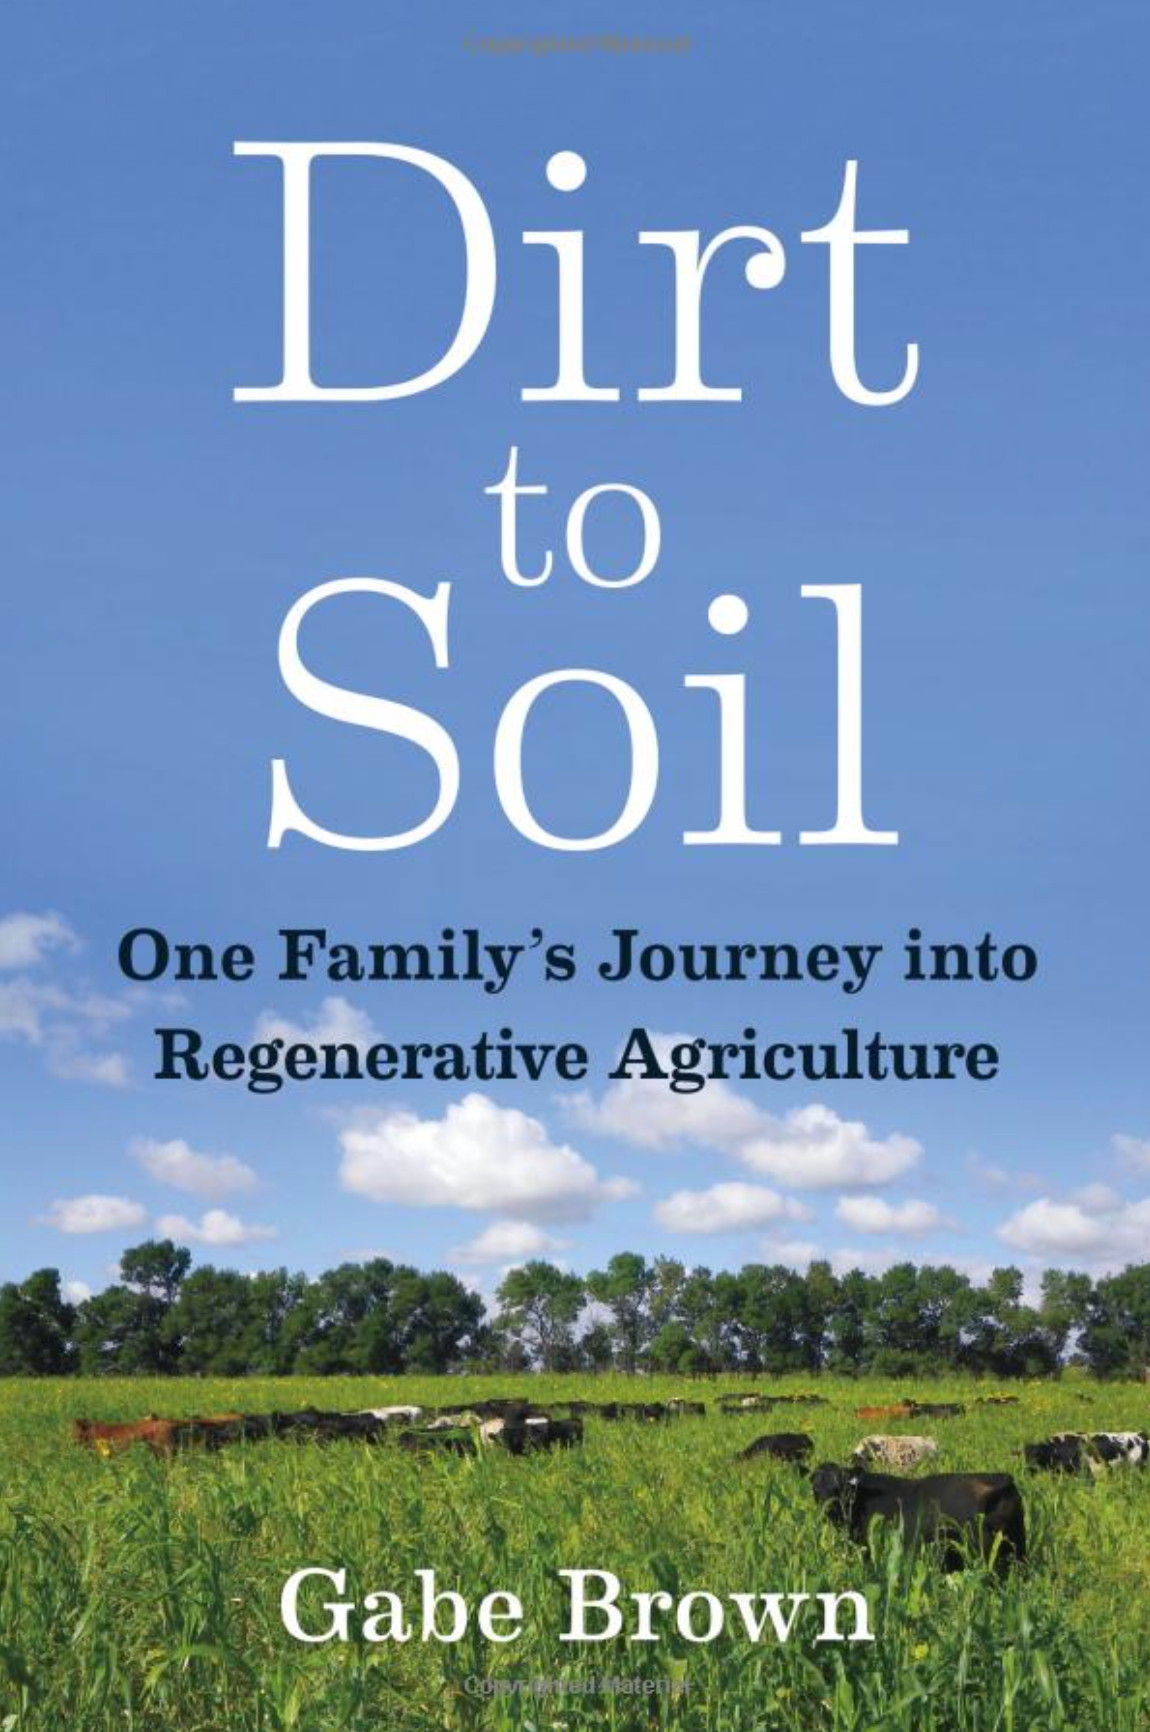 Dirt to Soil: One Family’s Journey into Regenerative Agriculture - by Gabe Brown